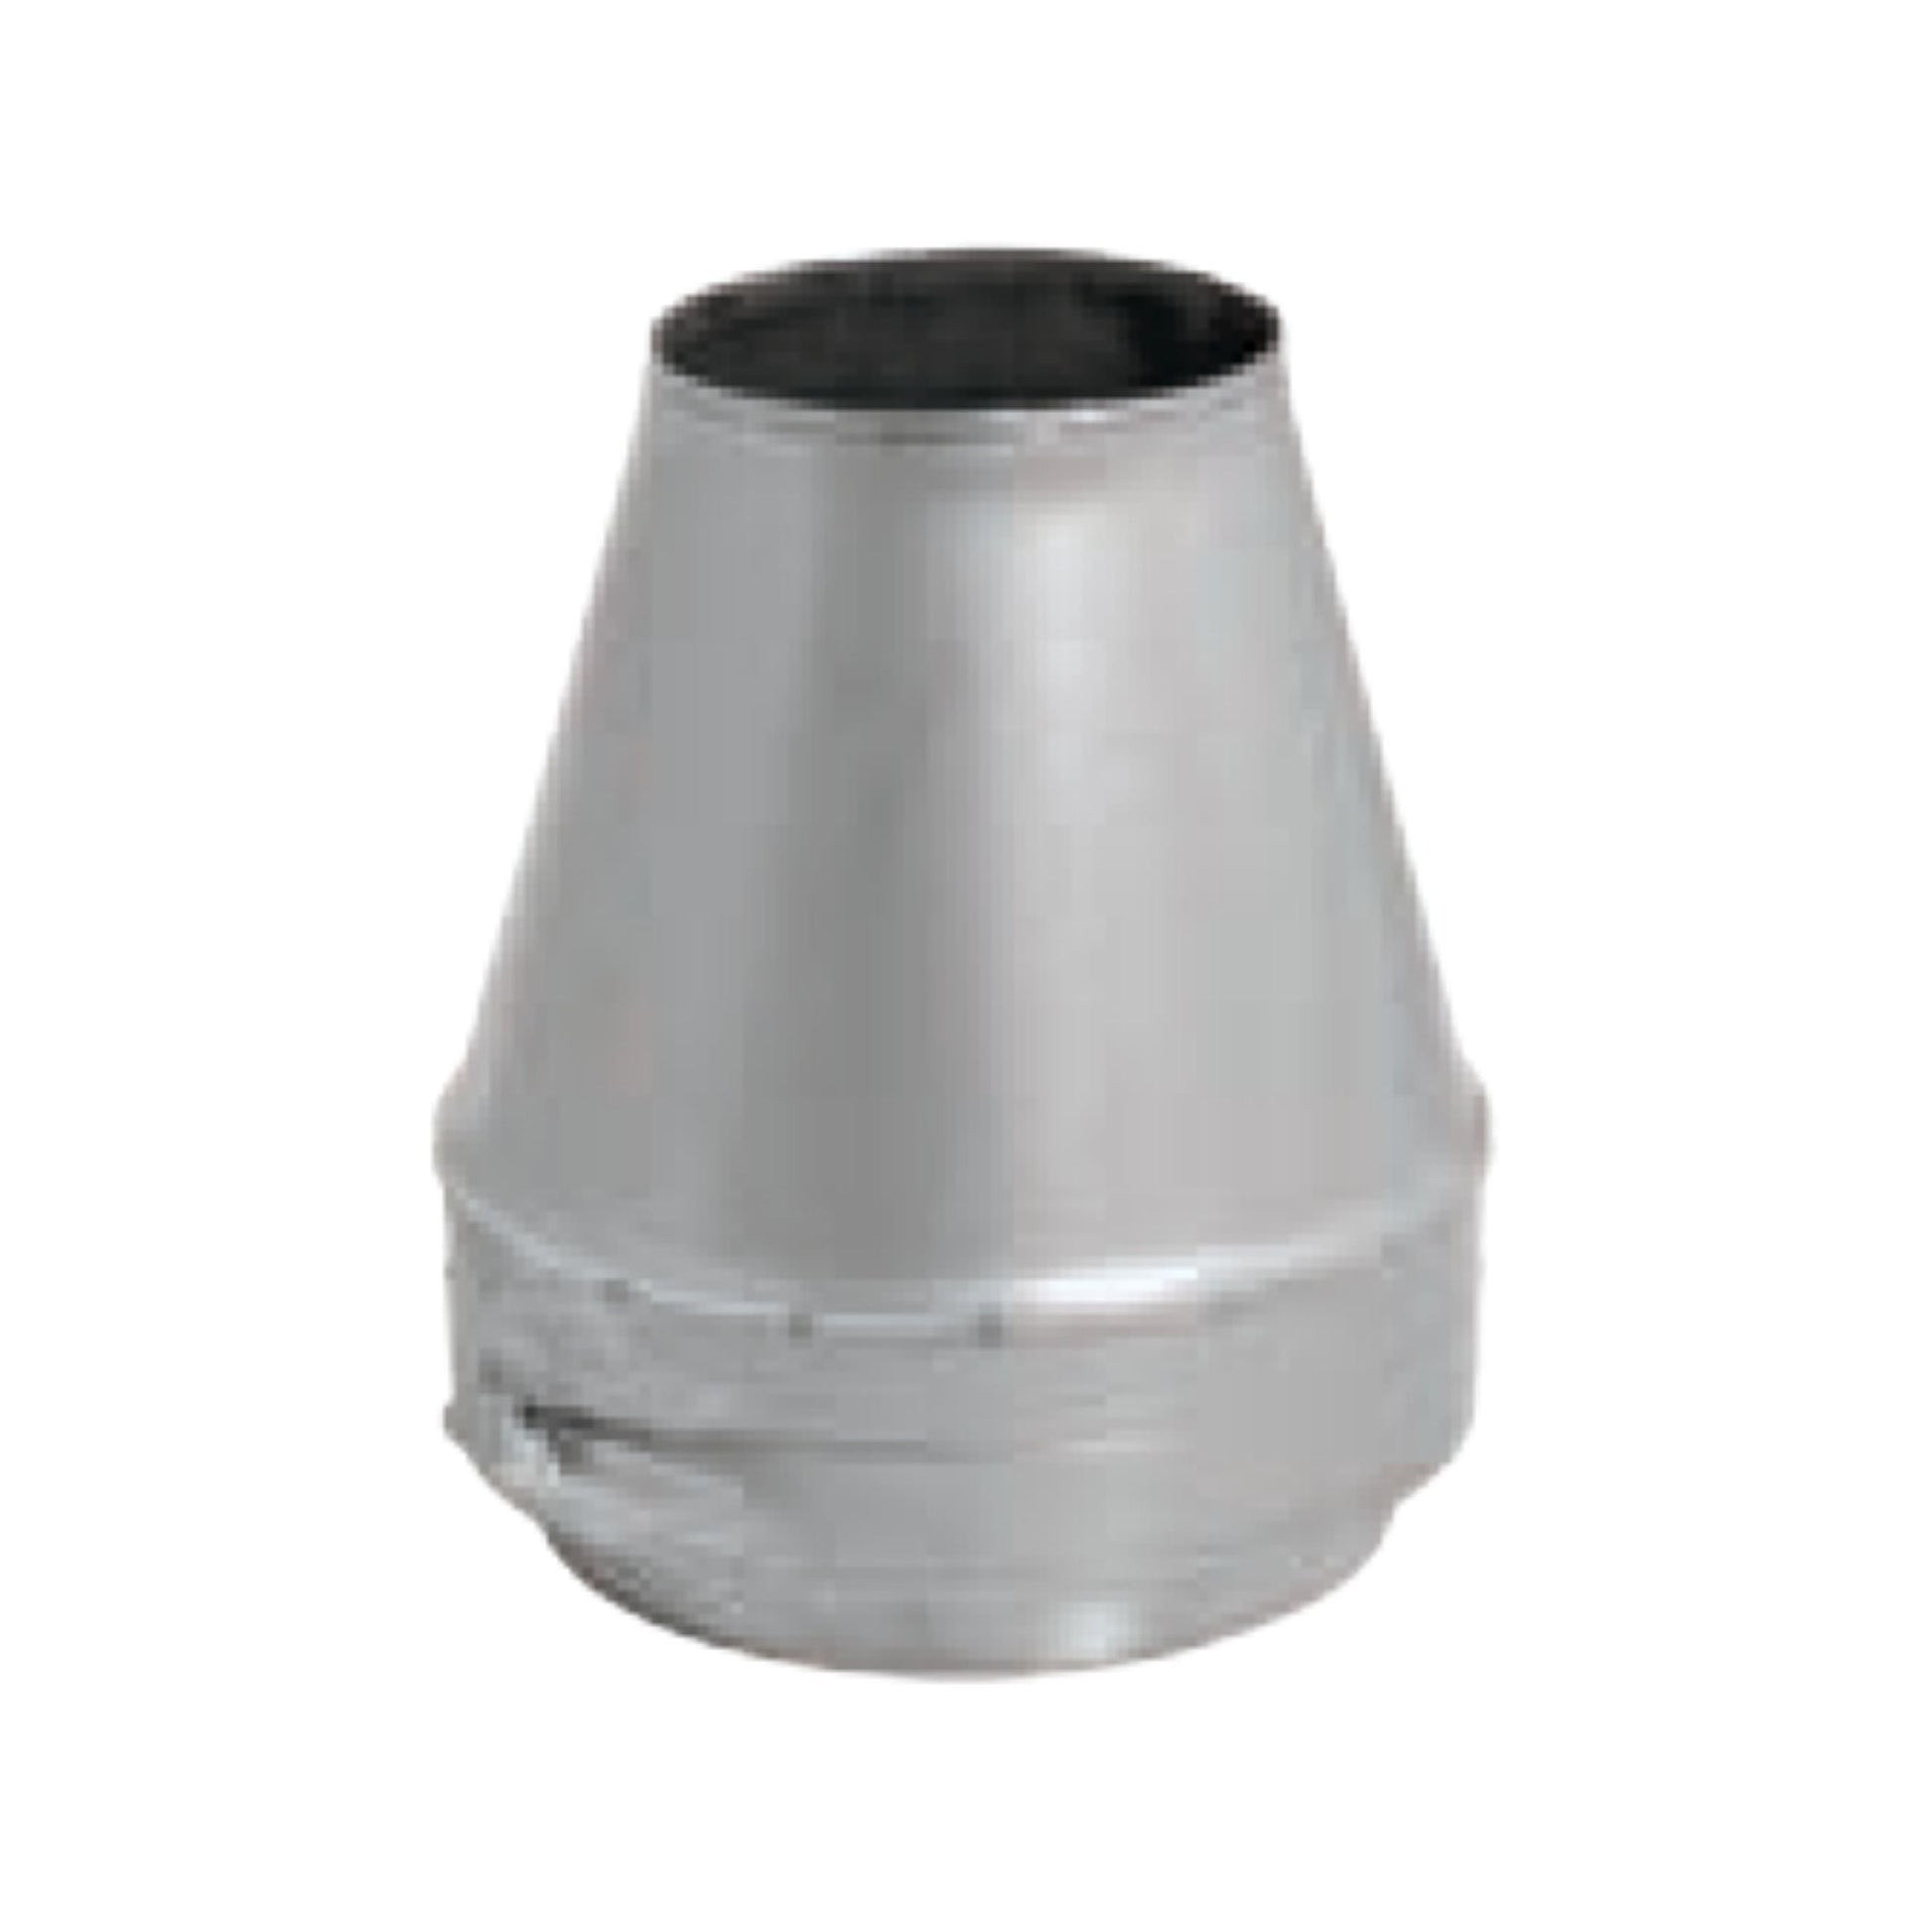 DuraVent FasNSeal W2 6" x 4" 29-4C Stainless Steel Double Wall Termination Cone